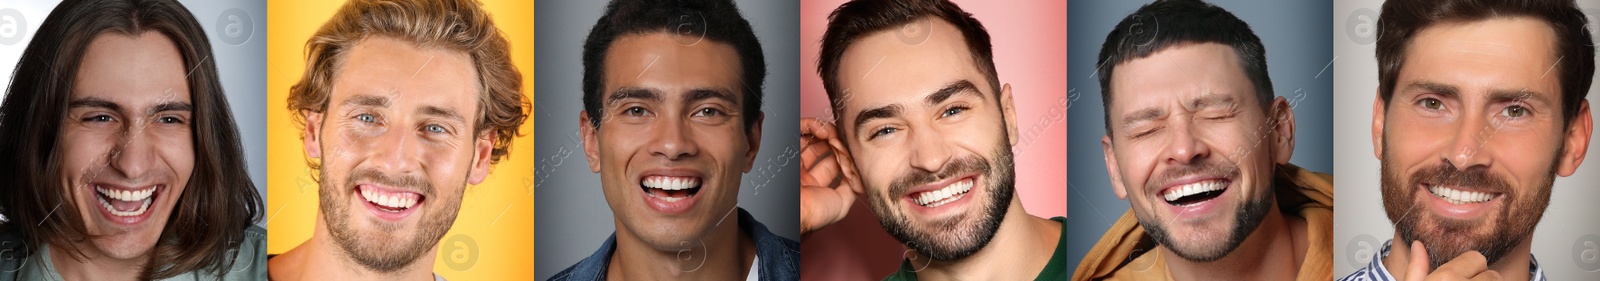 Image of Collage with portraits of happy men on different color backgrounds